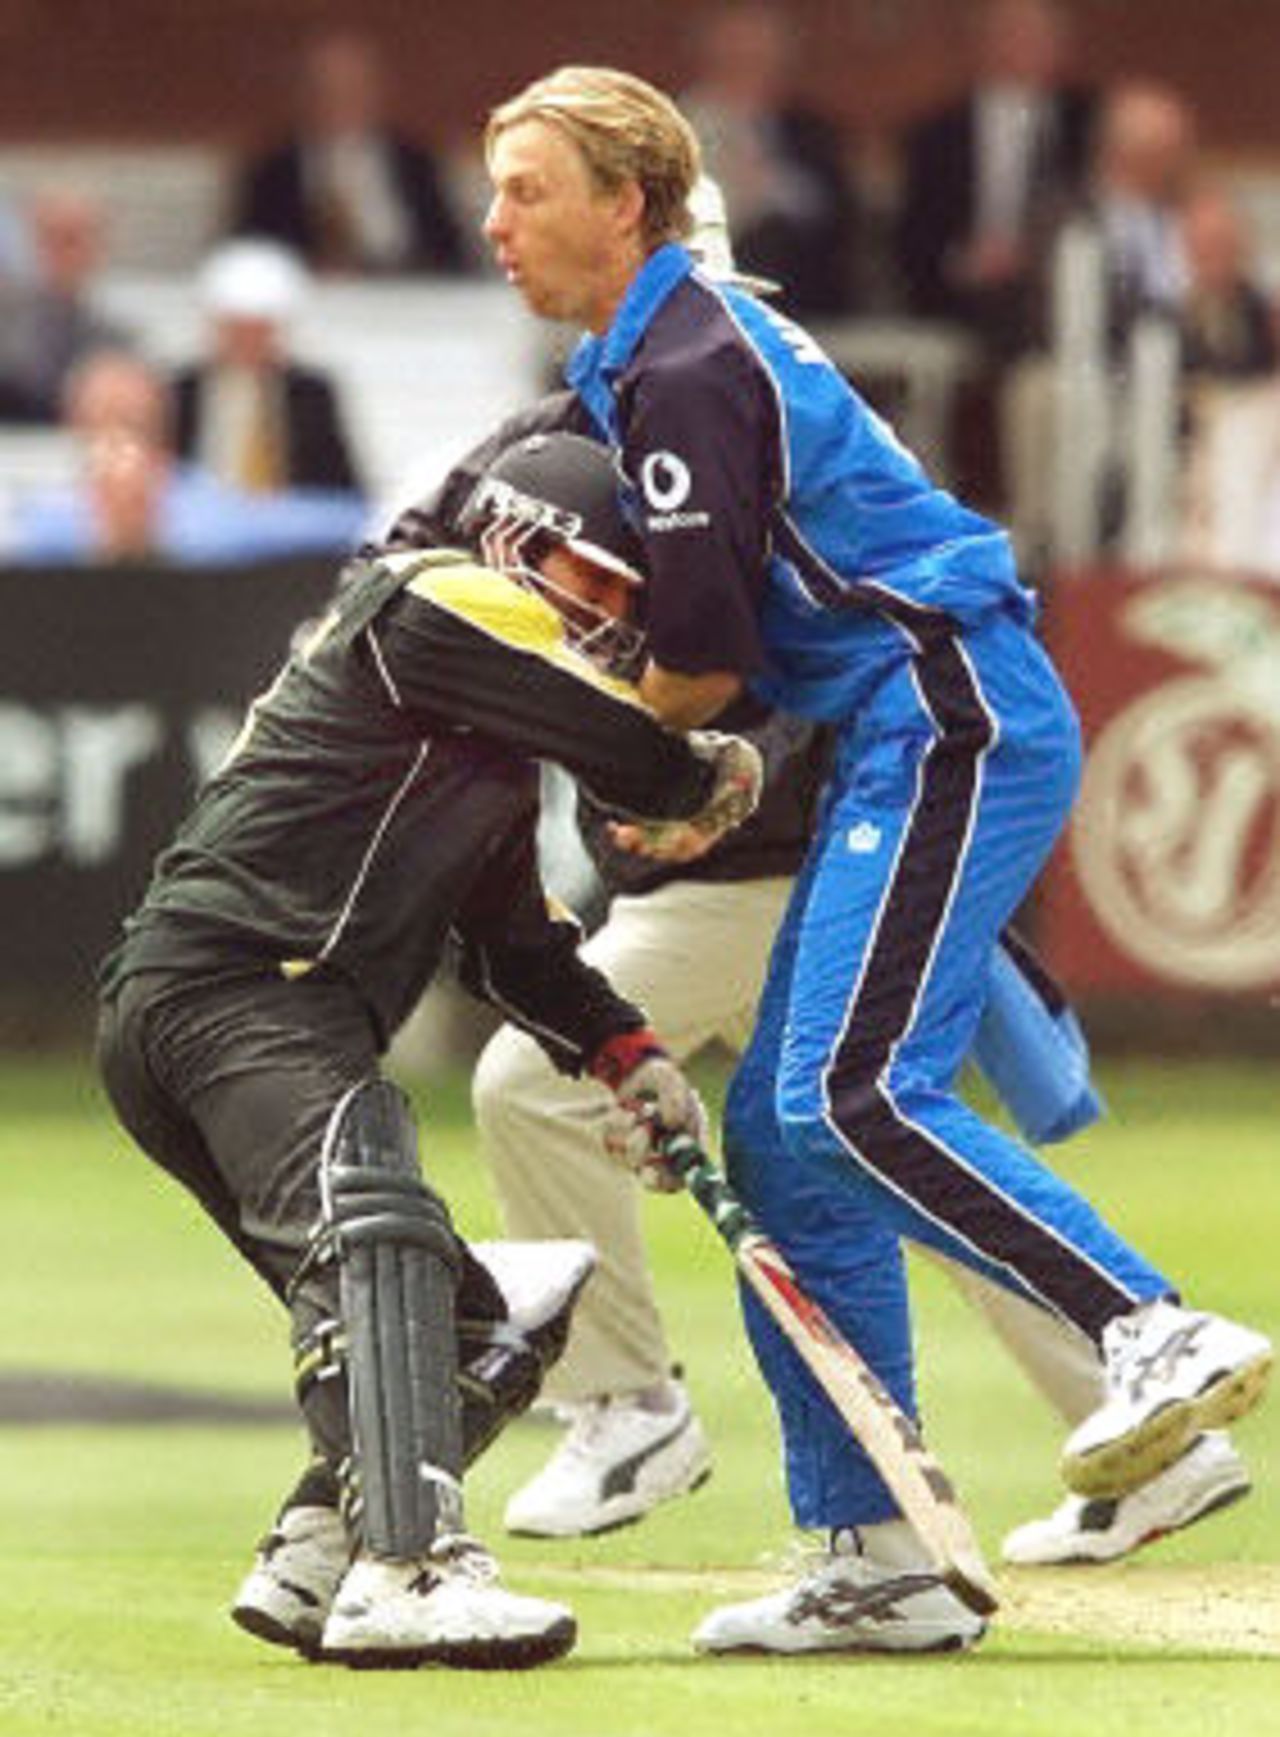 Yousuf Youhana and Alan Mullally collide mid-pitch as Youhana attempts a quick single, 4th ODI at Lords, 12 June 2001.